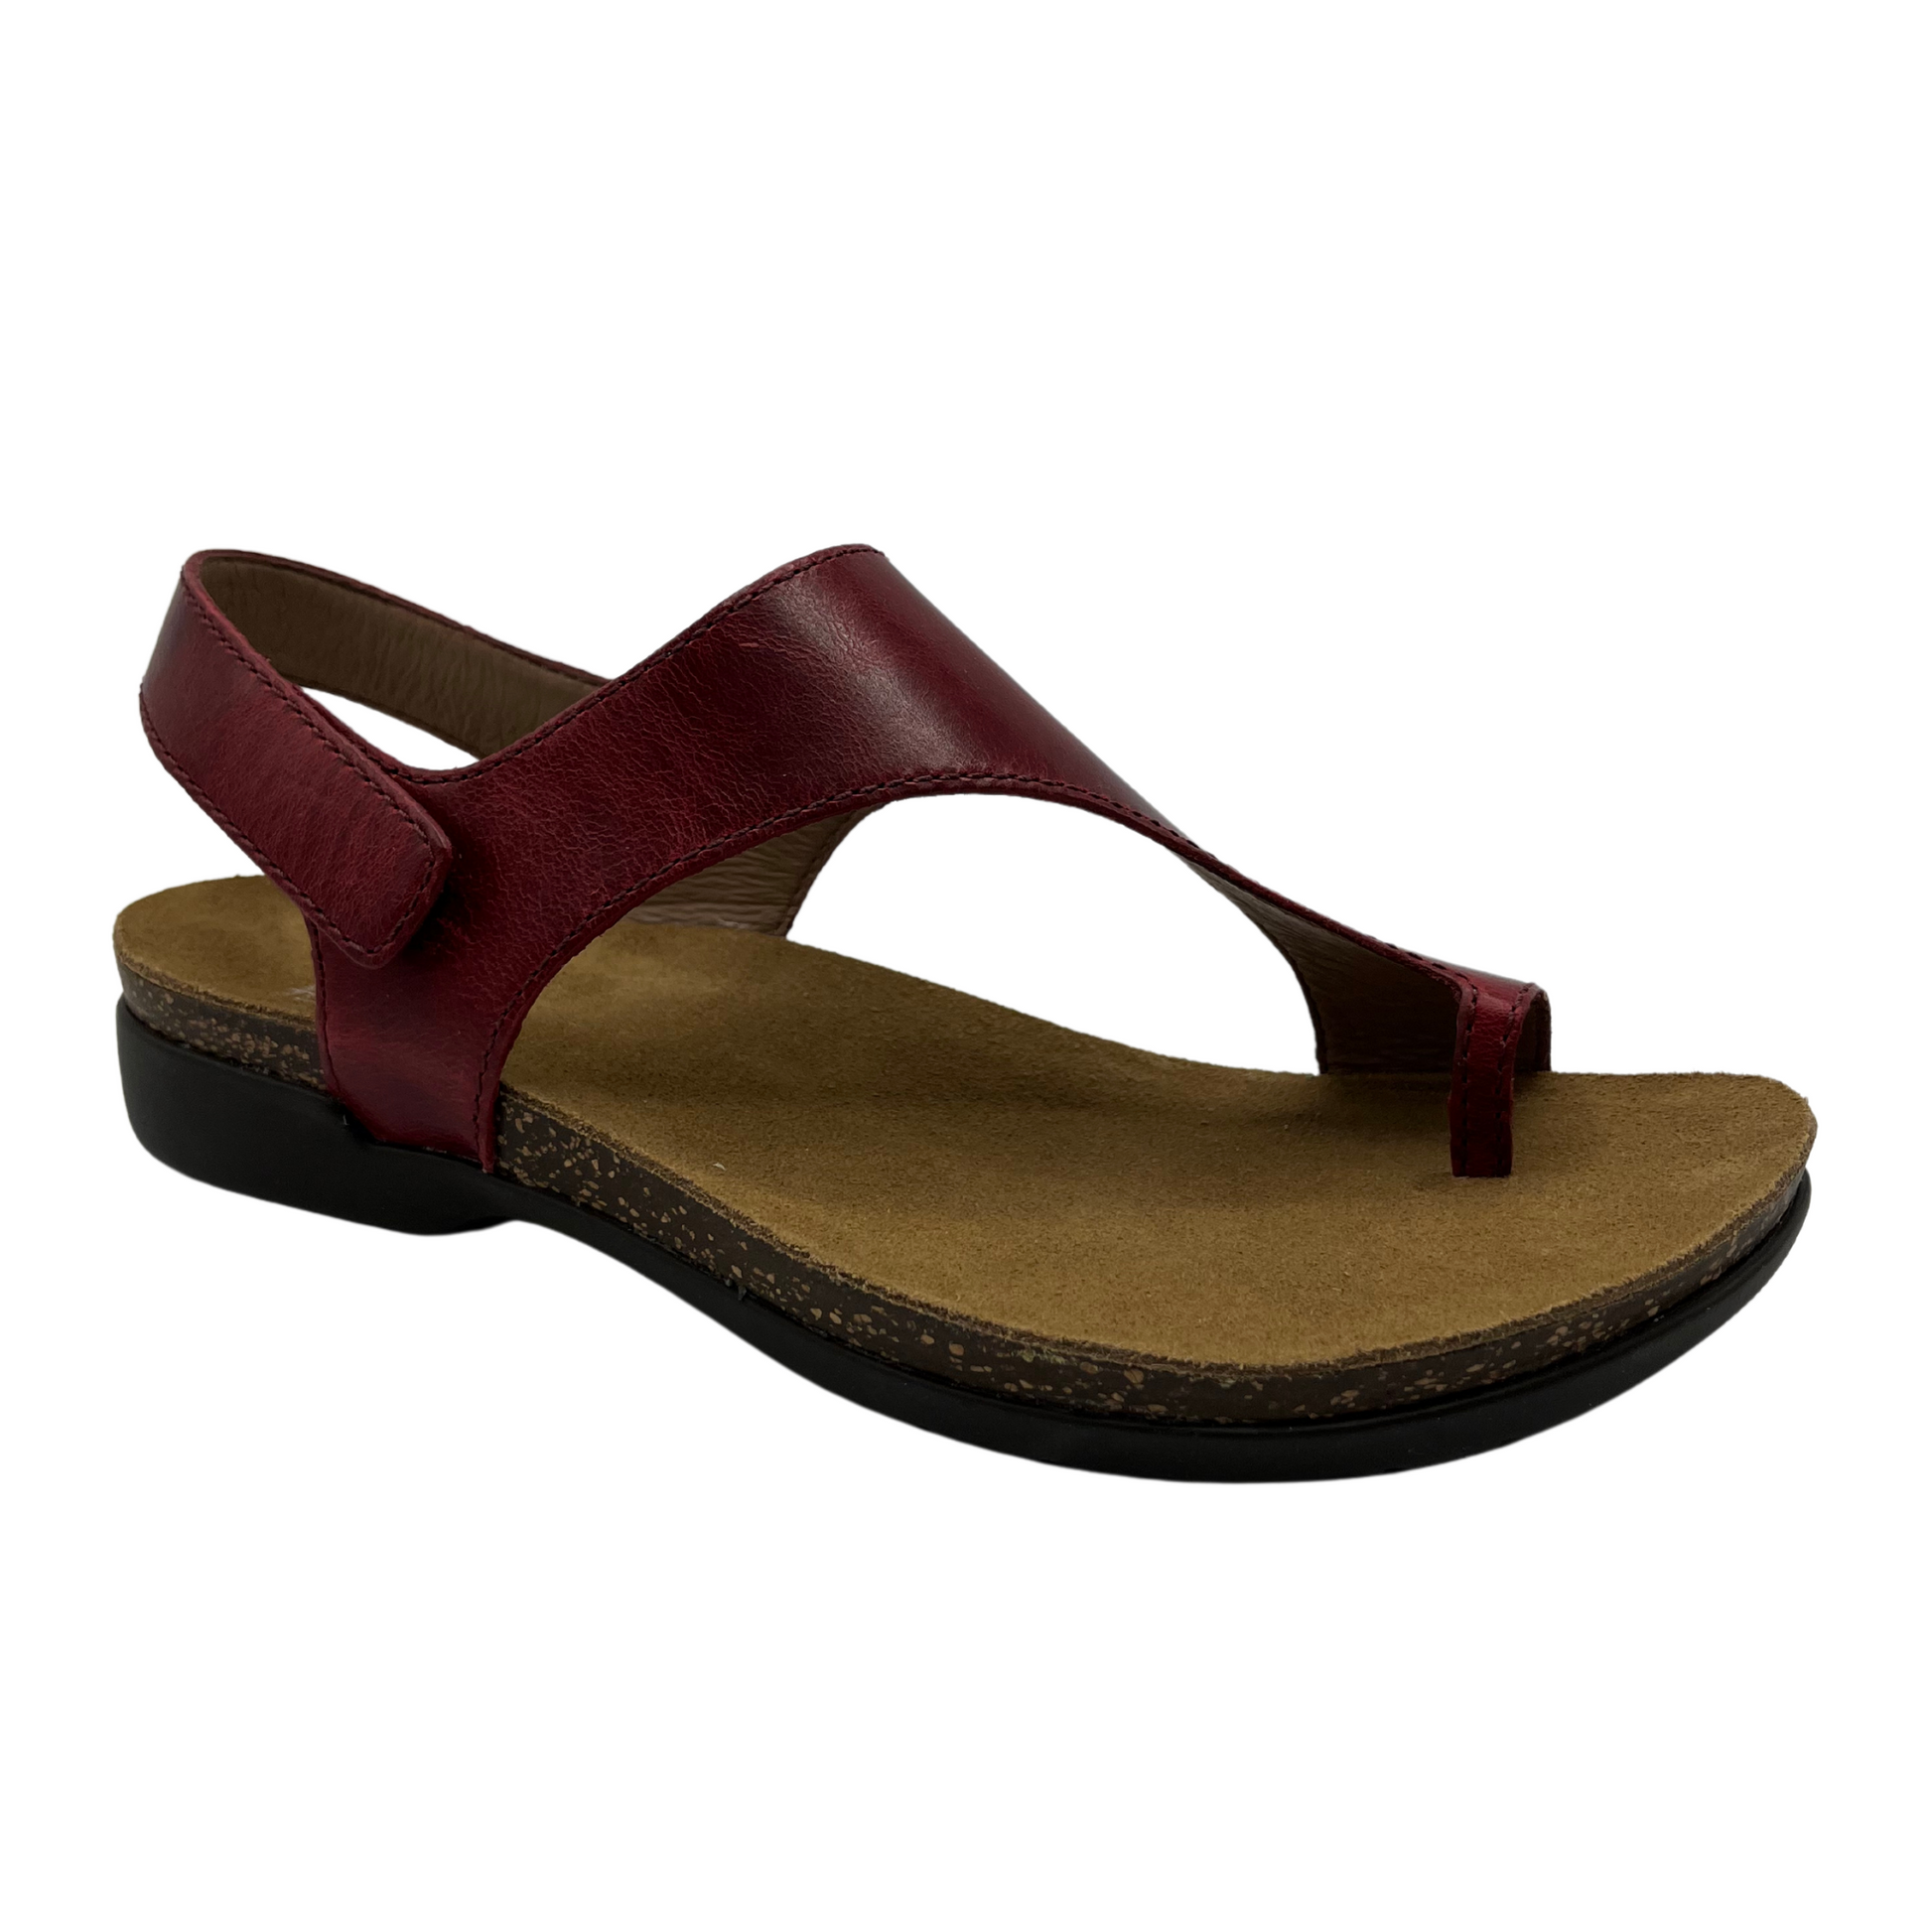 45 degree angled view of dark red leather sandal with velcro ankle strap and thin toe strap